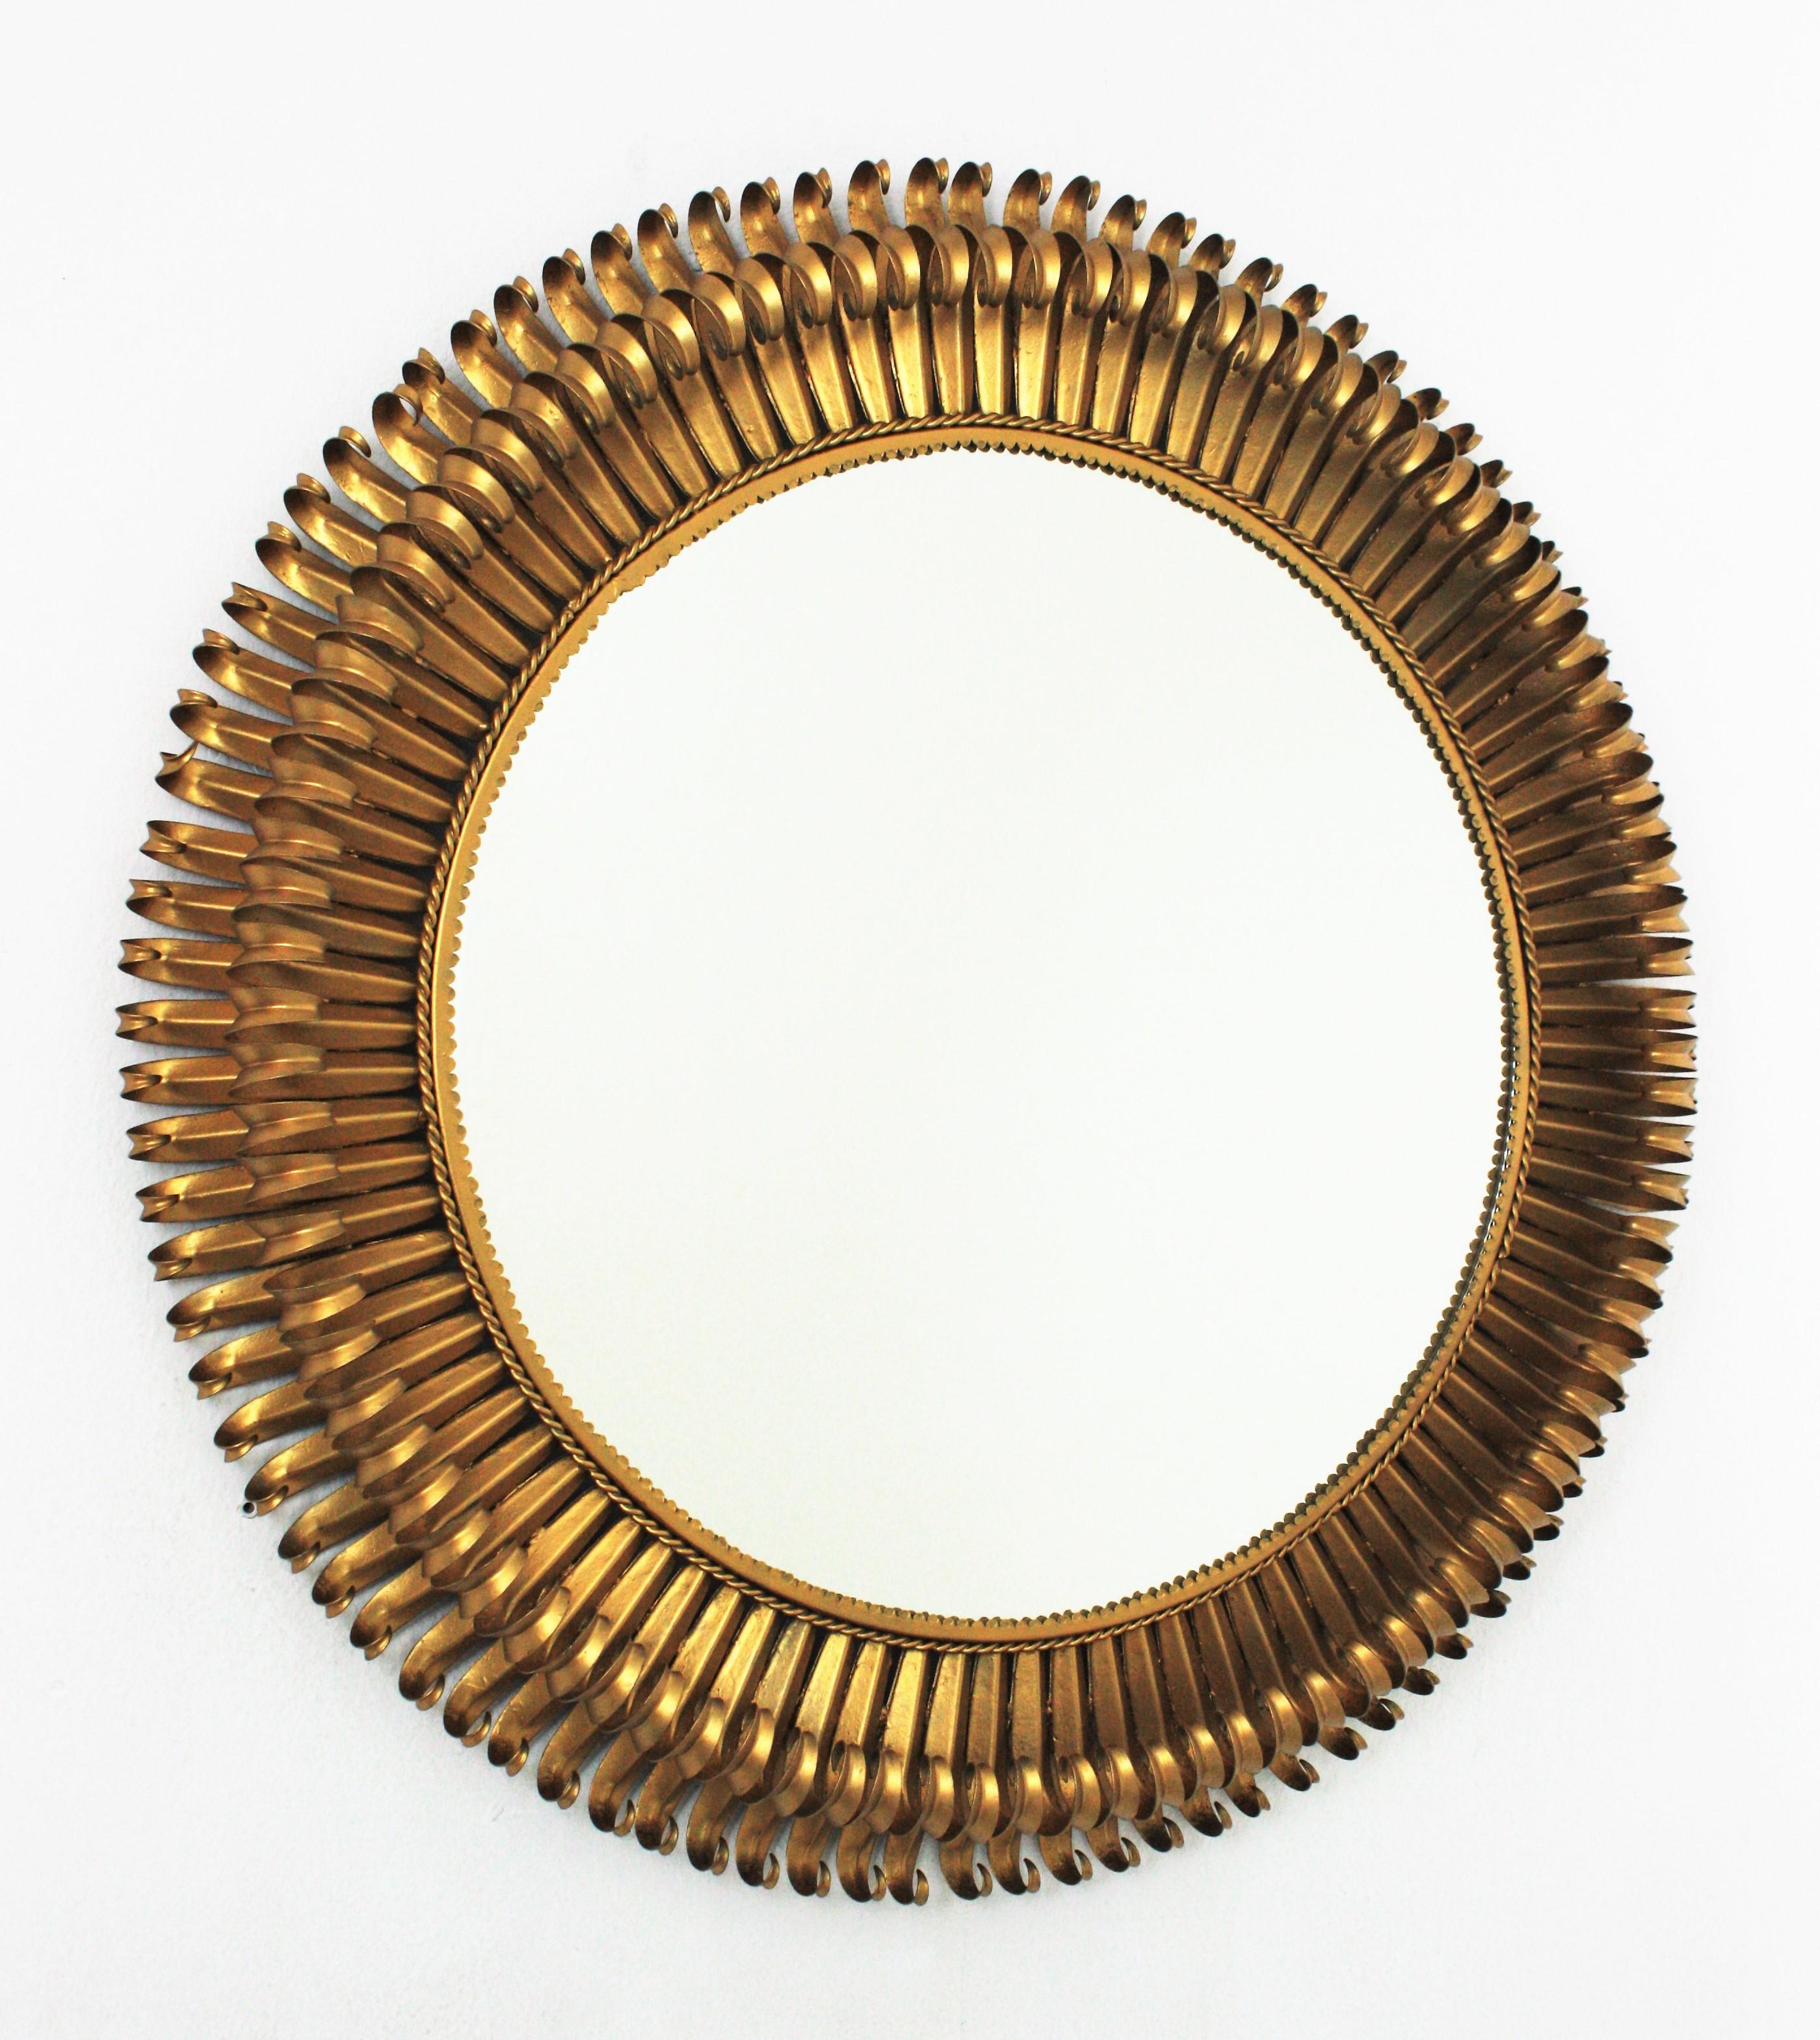 Frech Oversized Sunburst Mirror, Gilt Iron
Massive double layered eyelash gilt wrought  iron sunburst mirror, France, 1950s
The frame is made by a double layer of curved beams in eyelash shape.
This is one of the larger examples of this type of